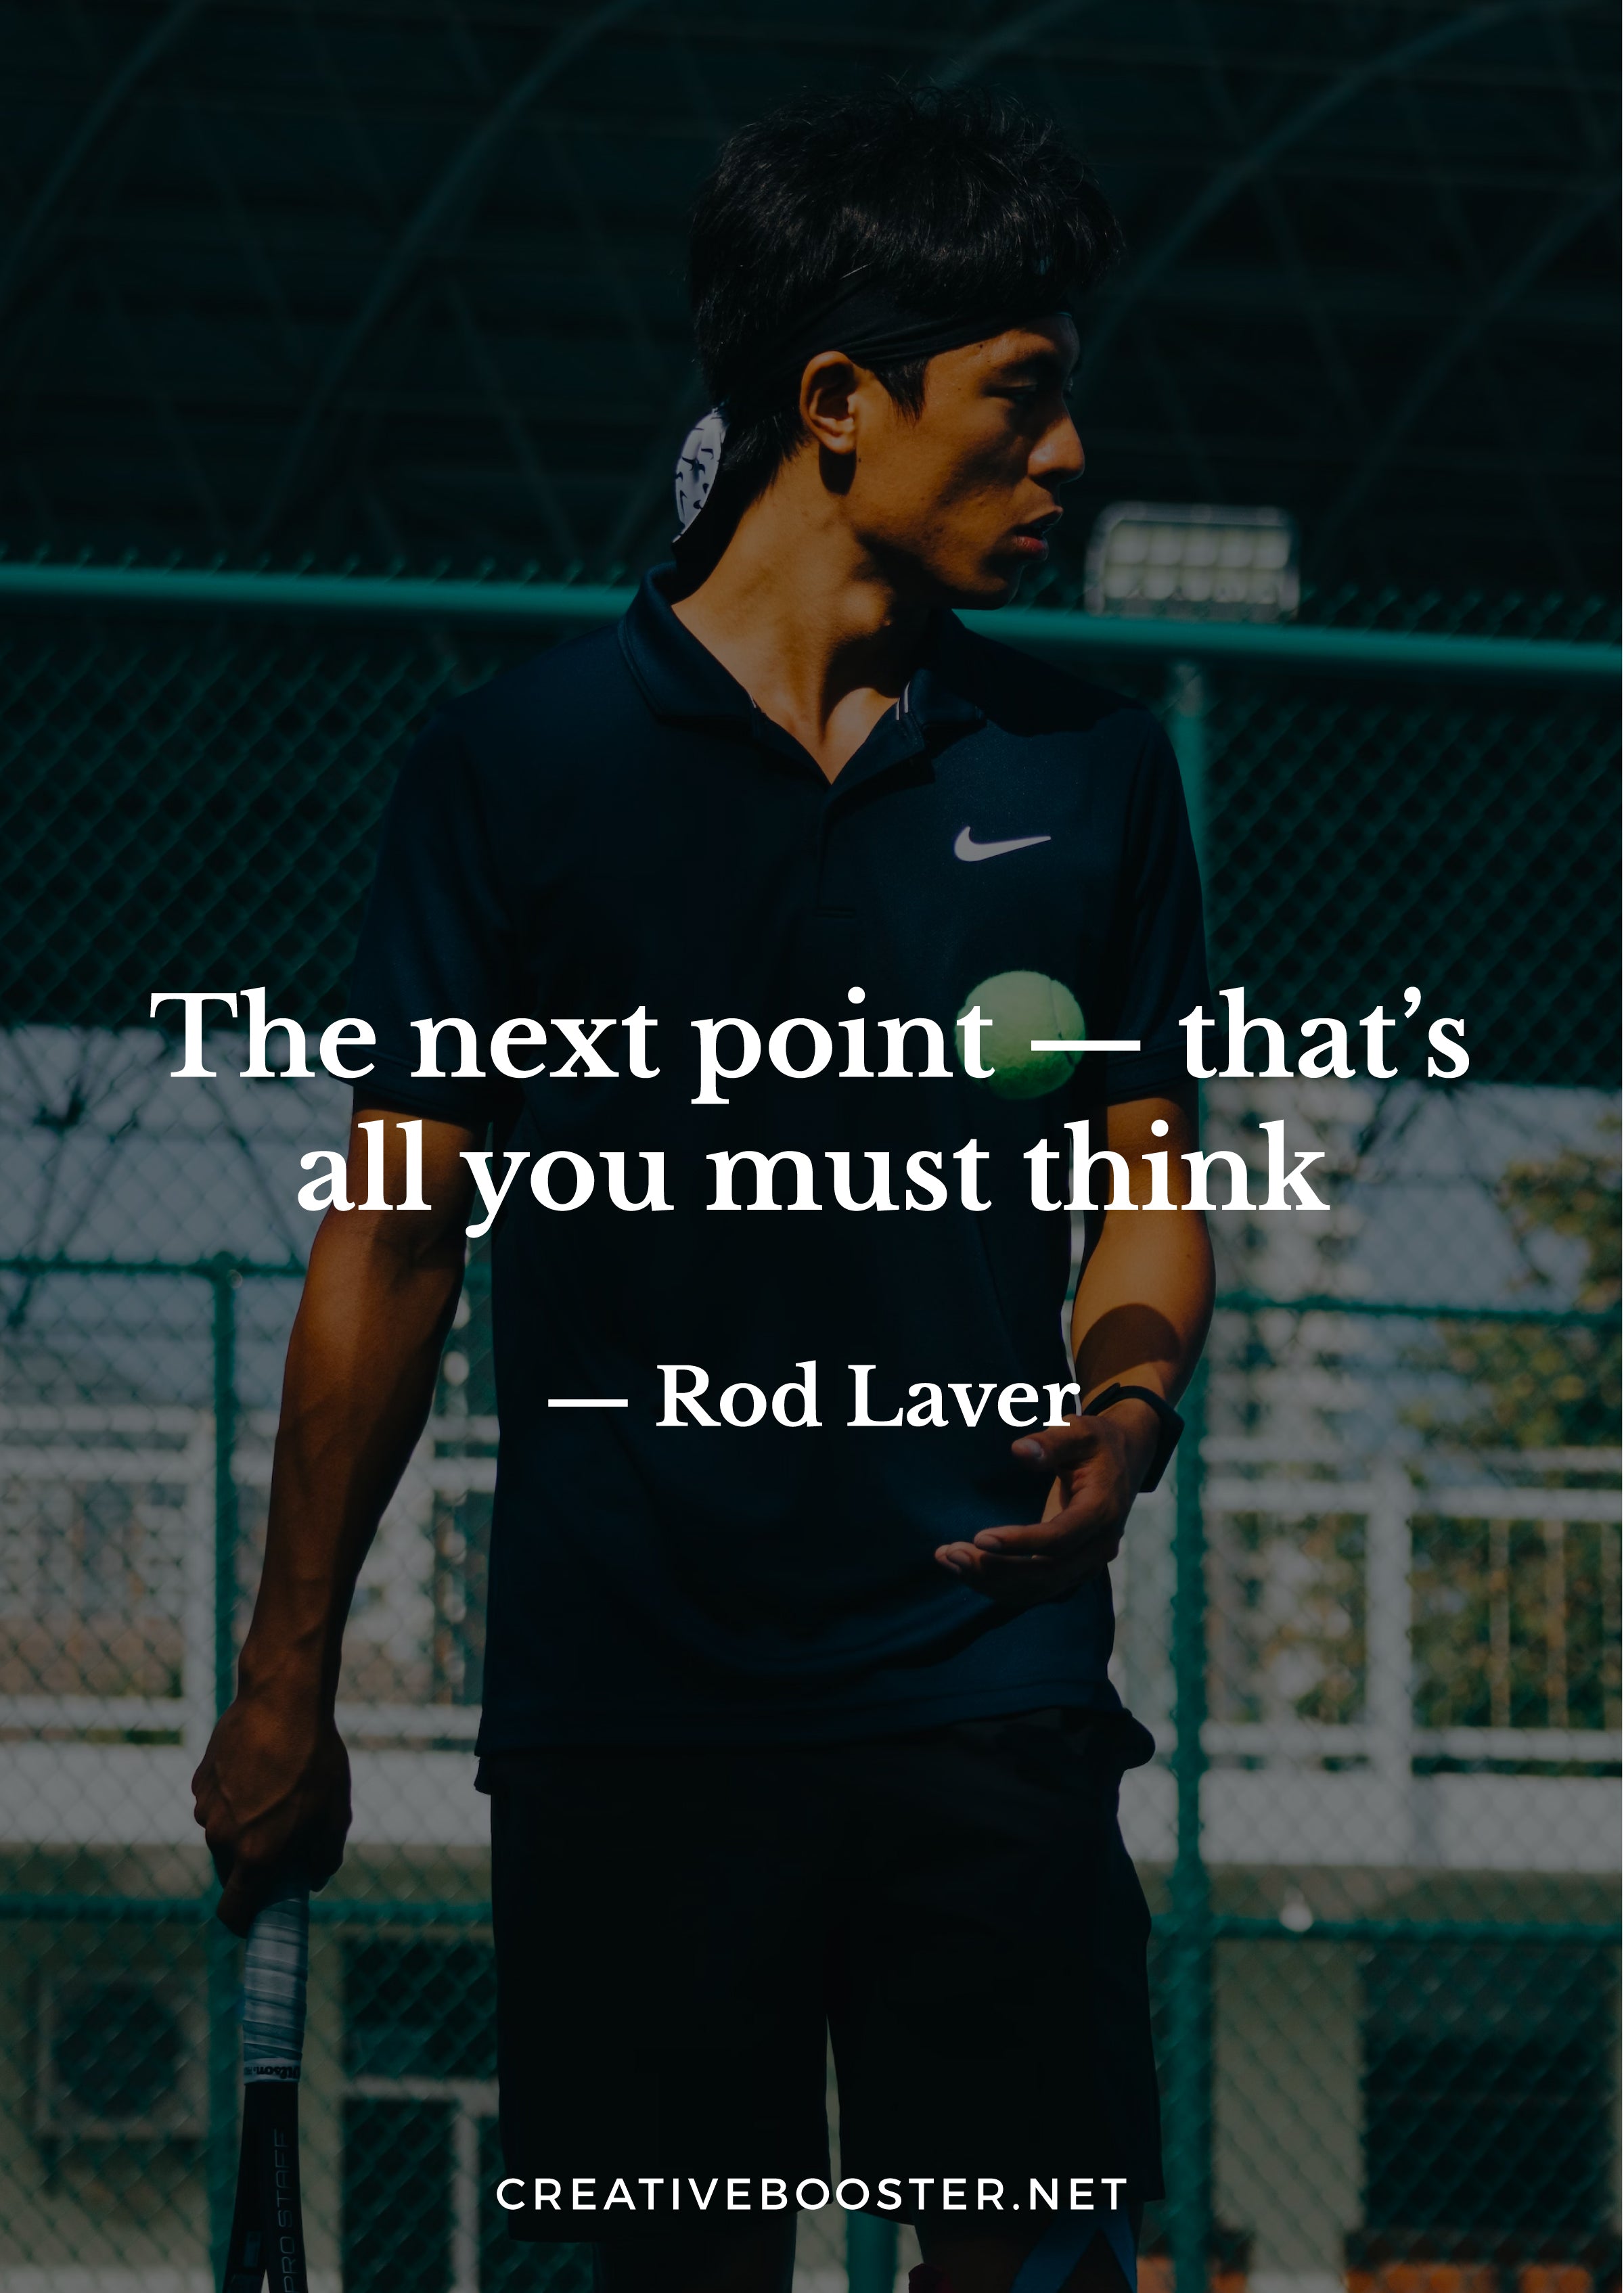 "The next point — that’s all you must think about." - Rod Laver